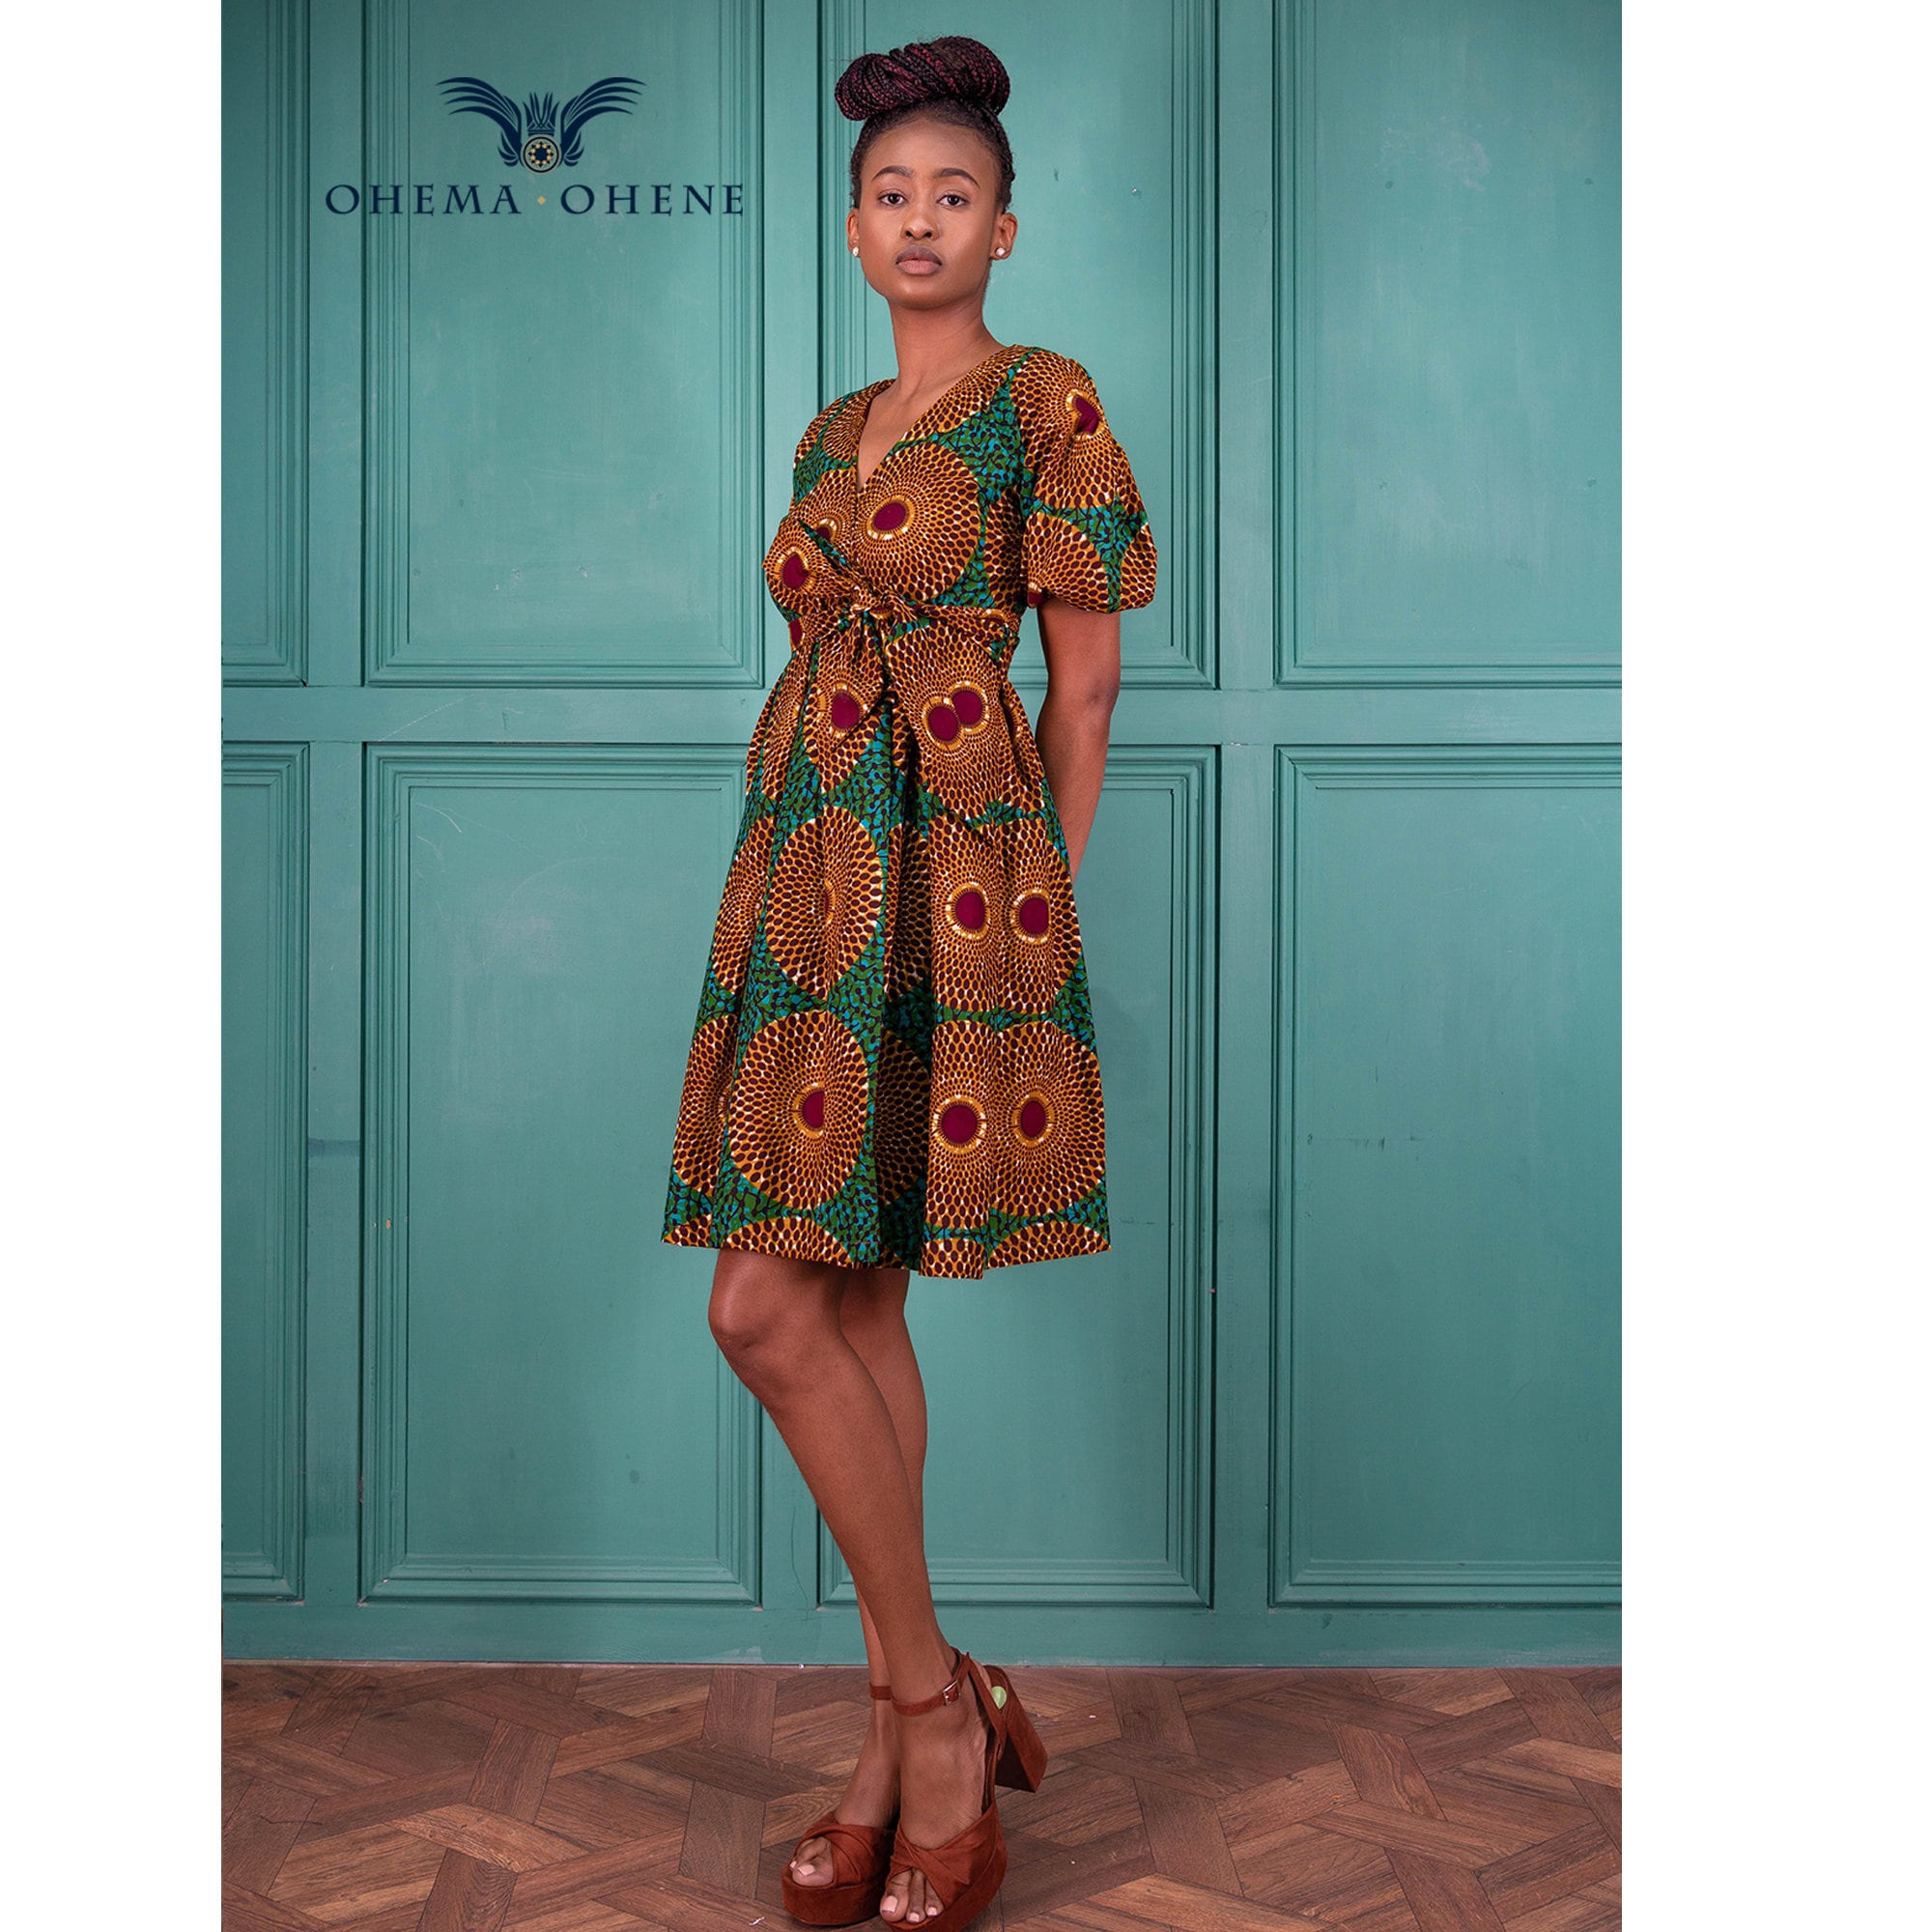 Tabitha Brown Pops in This African Print Dress